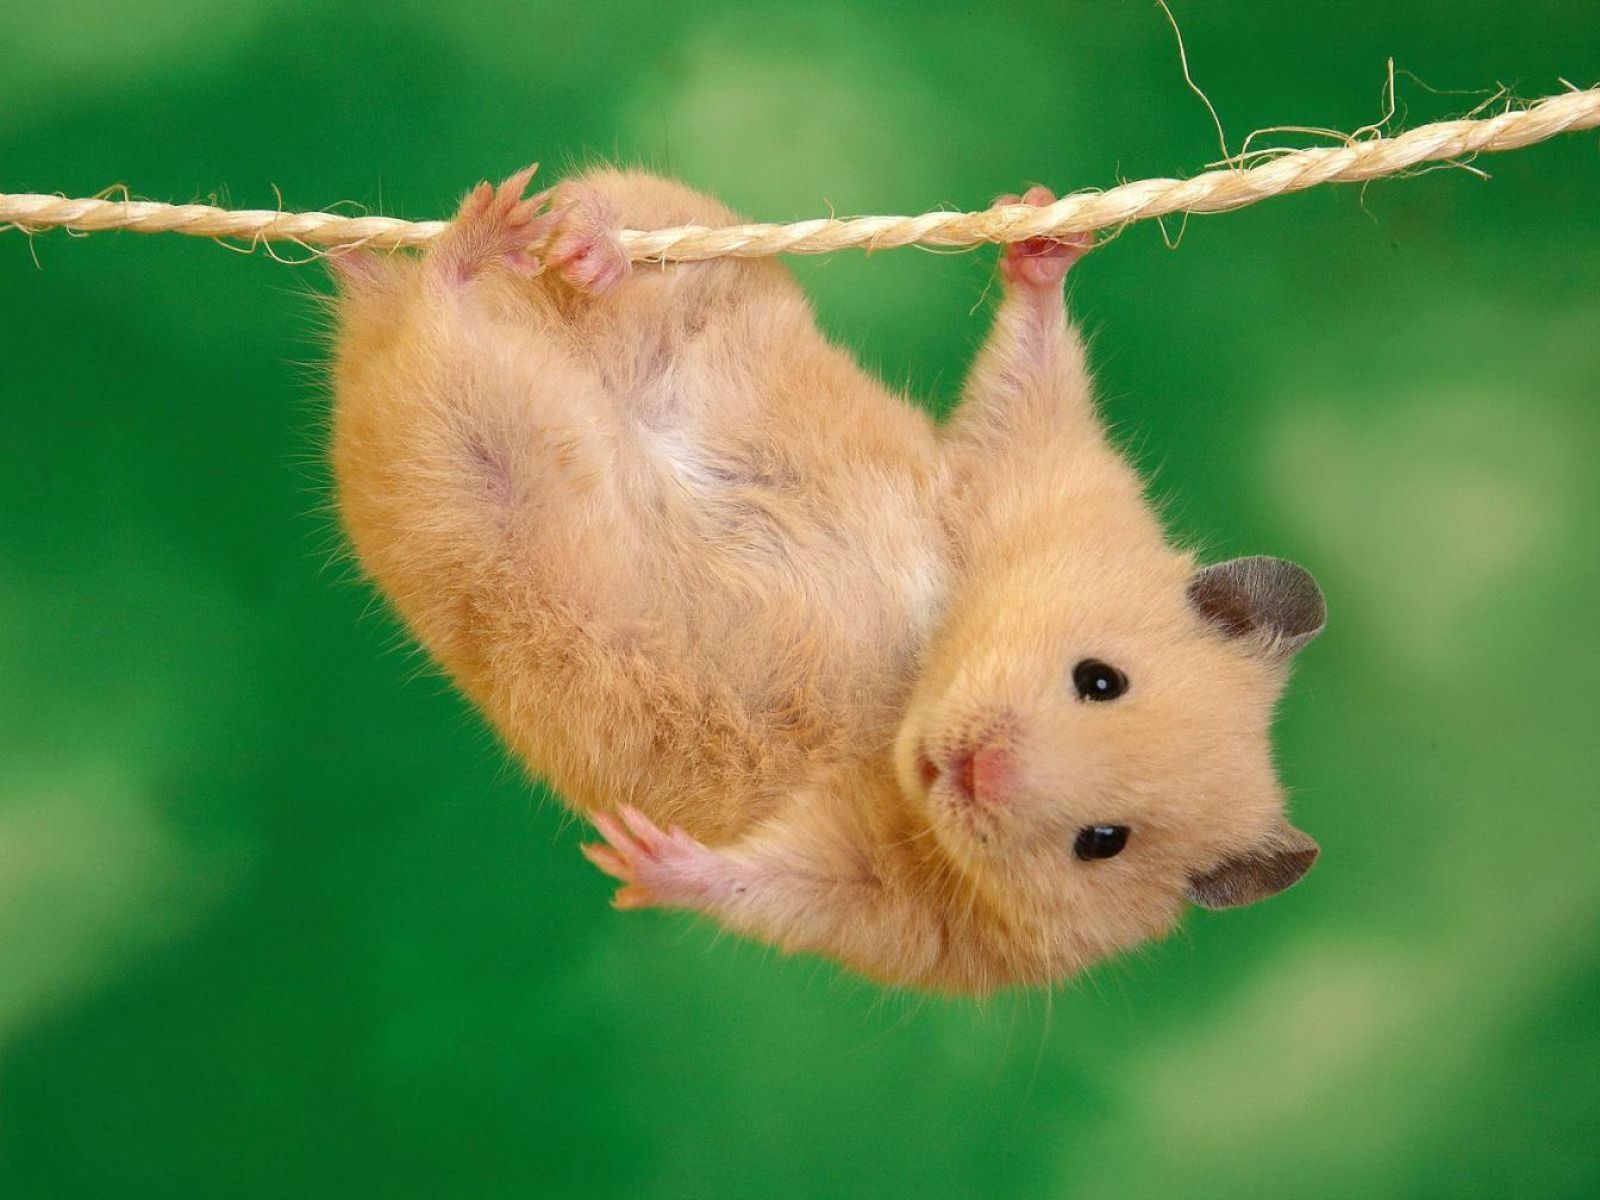 Cute Hamster Aerobics Wallpaper. HD Animals and Birds Wallpaper for Mobile and Desktop